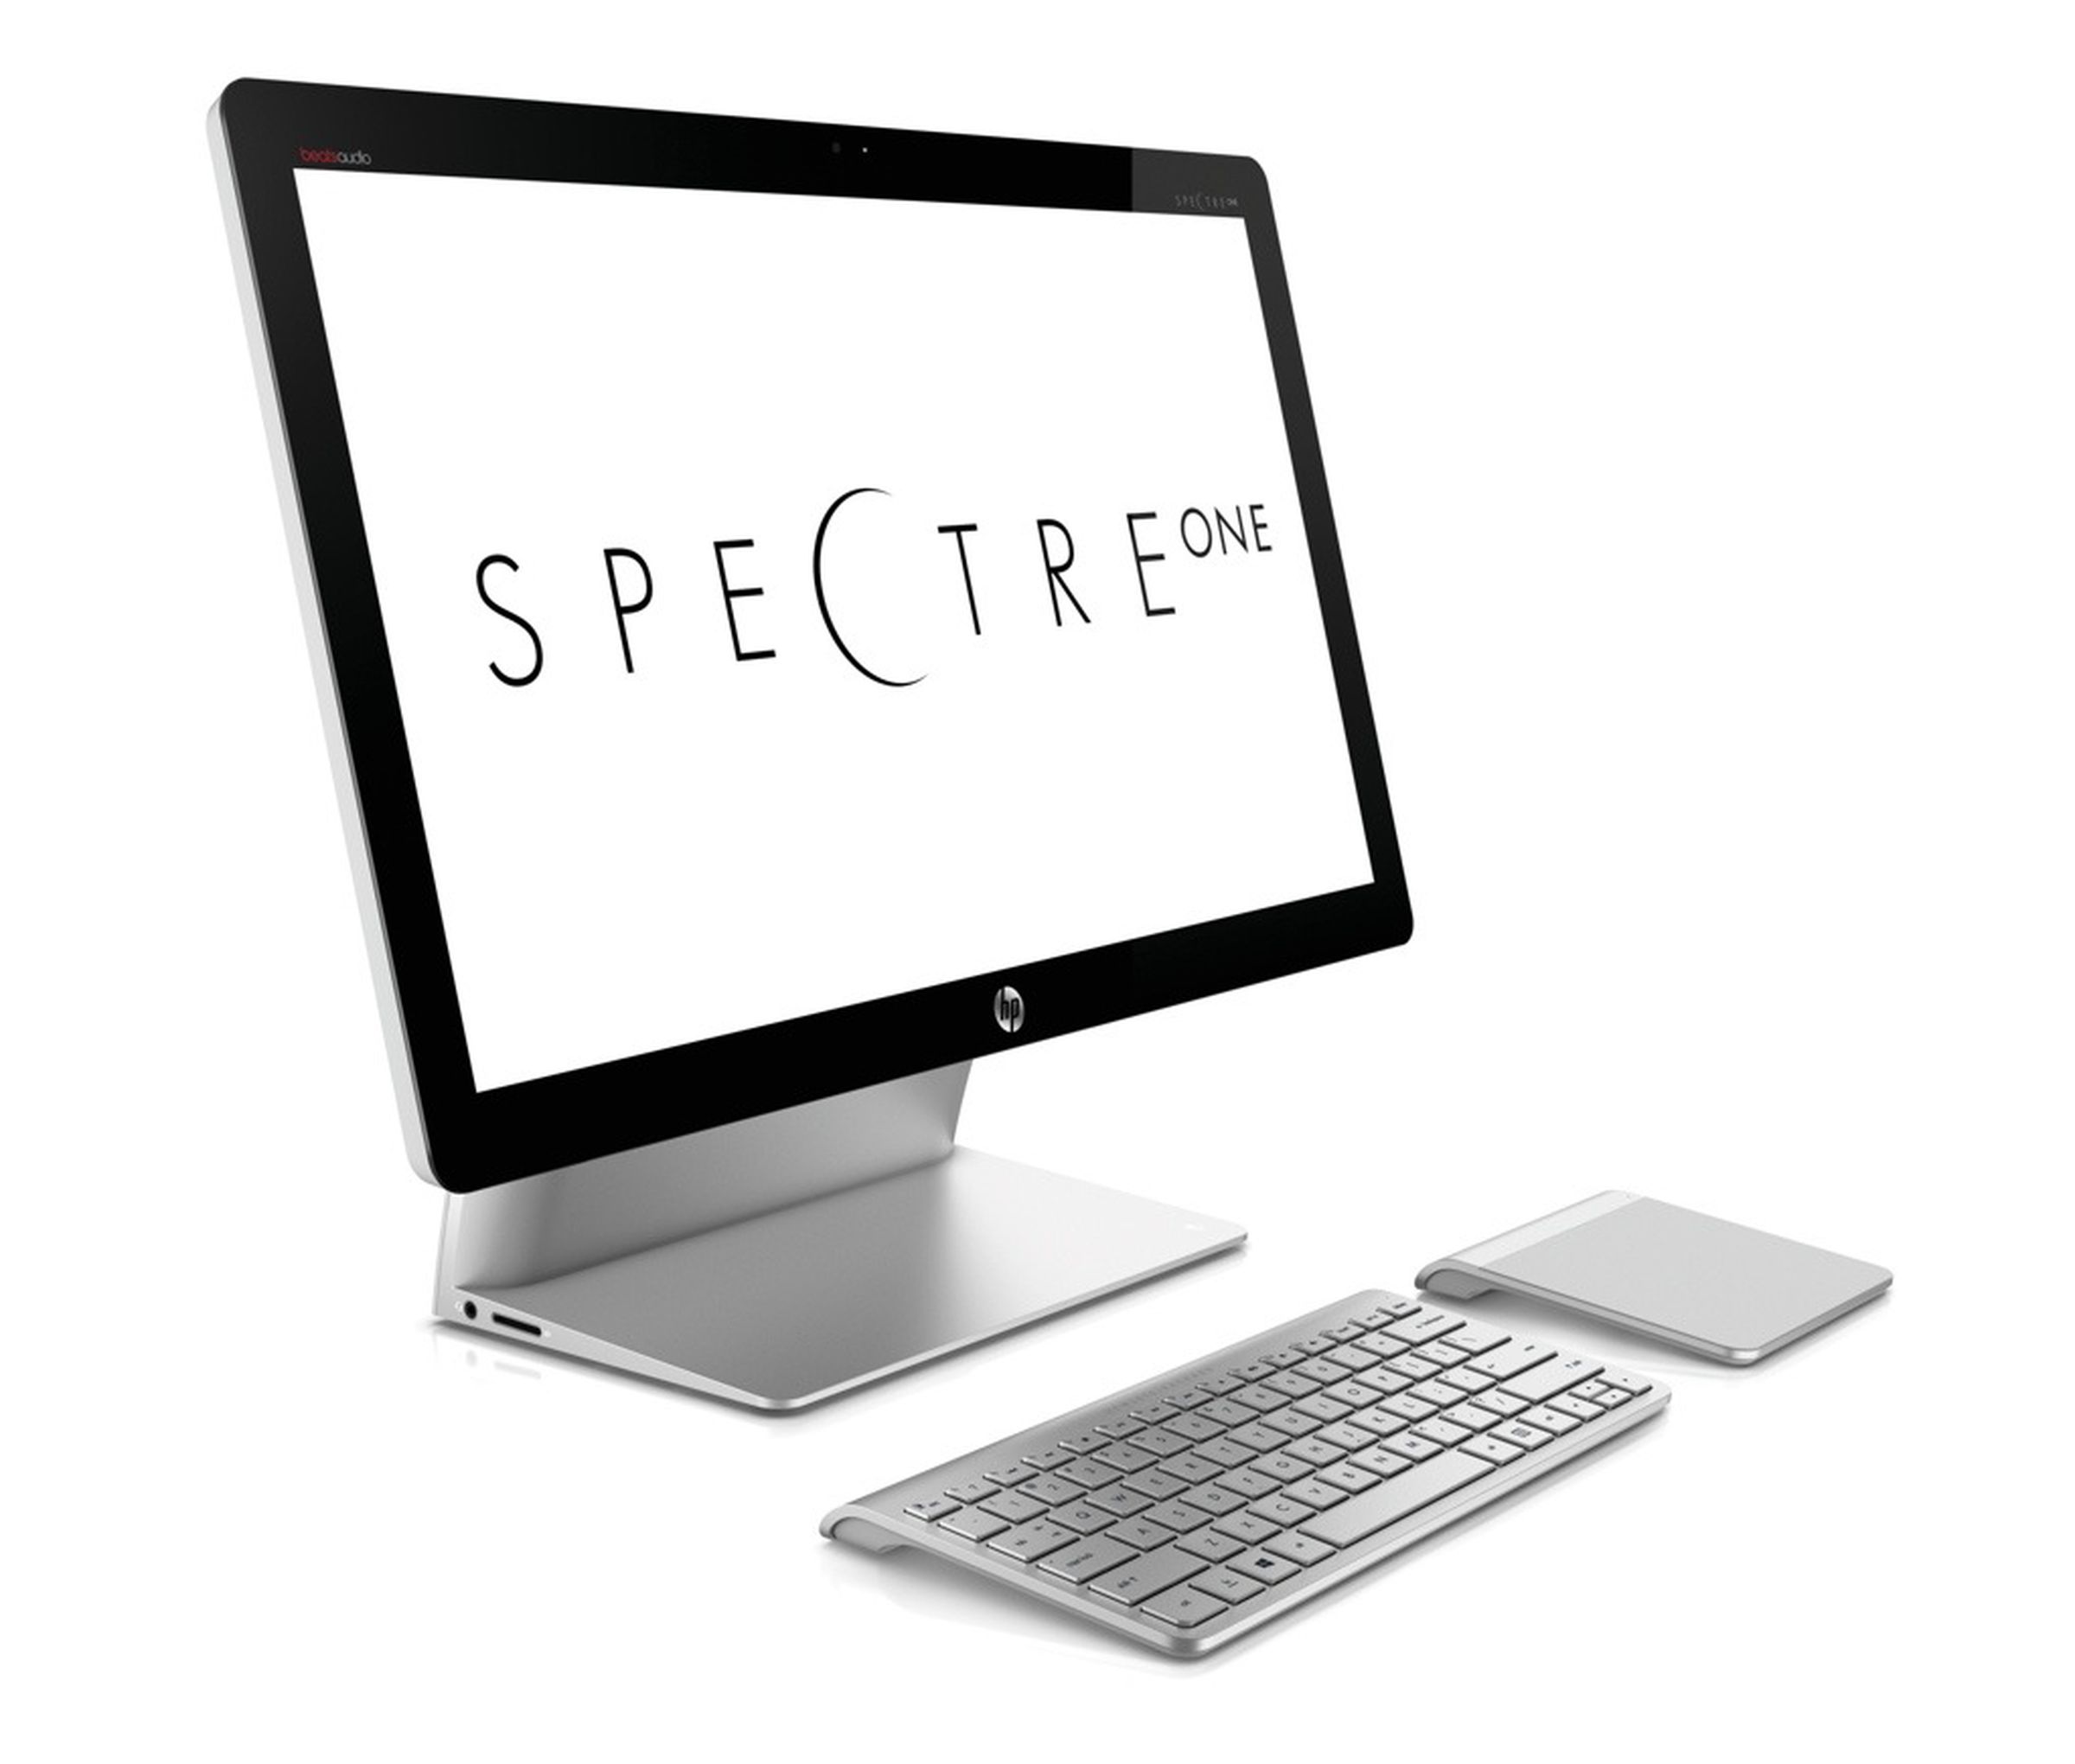 HP Spectre One all-in-one desktop official photos